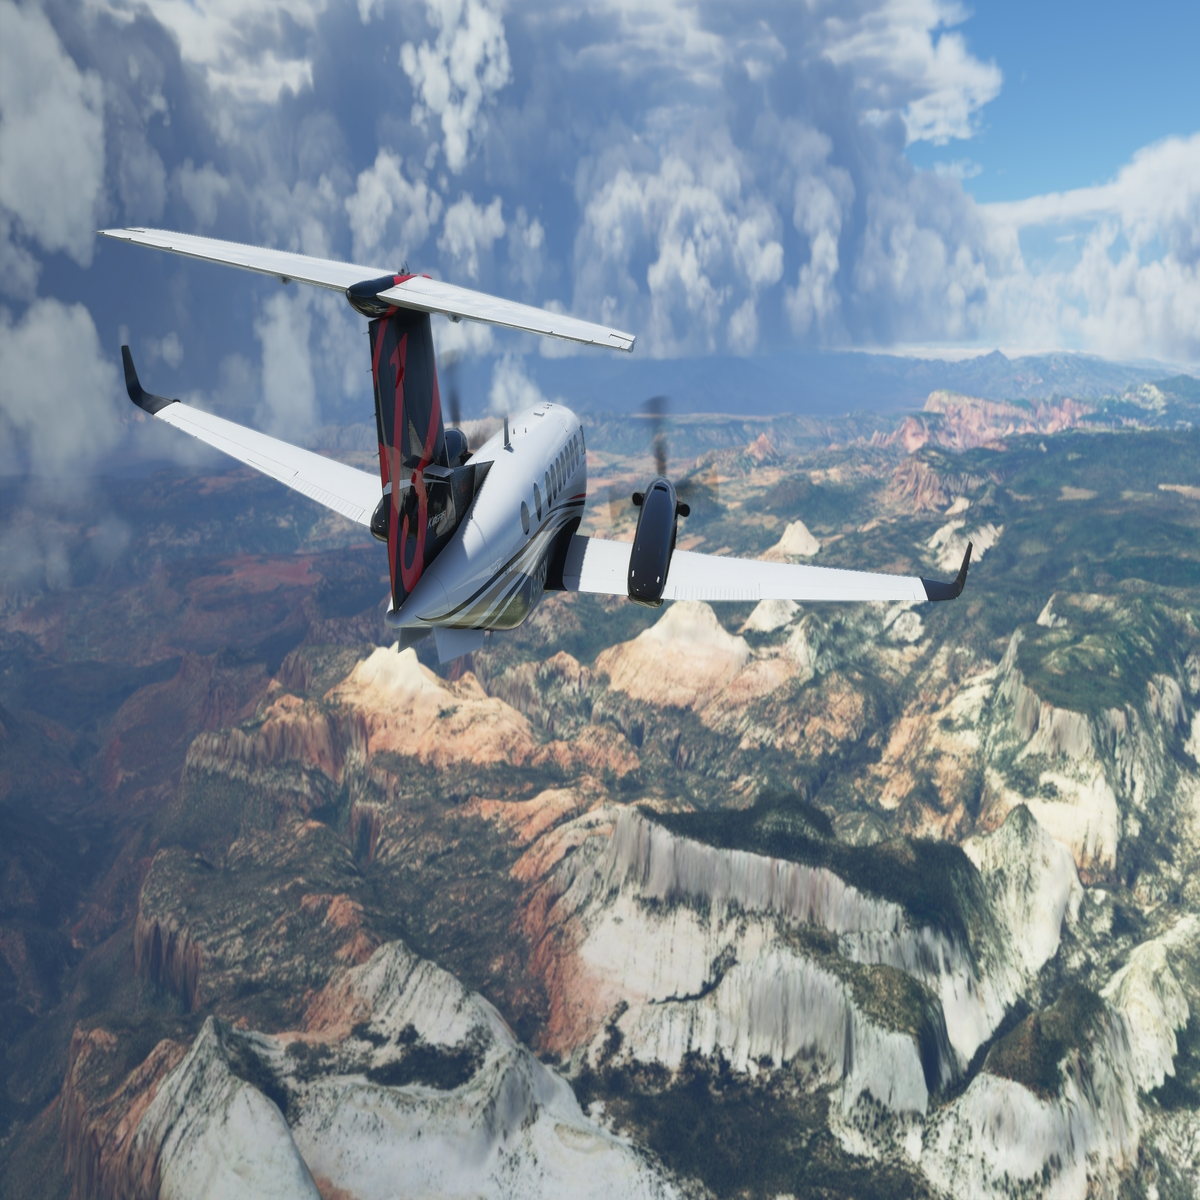 Microsoft Flight Simulator 2020 lets you take to the skies with